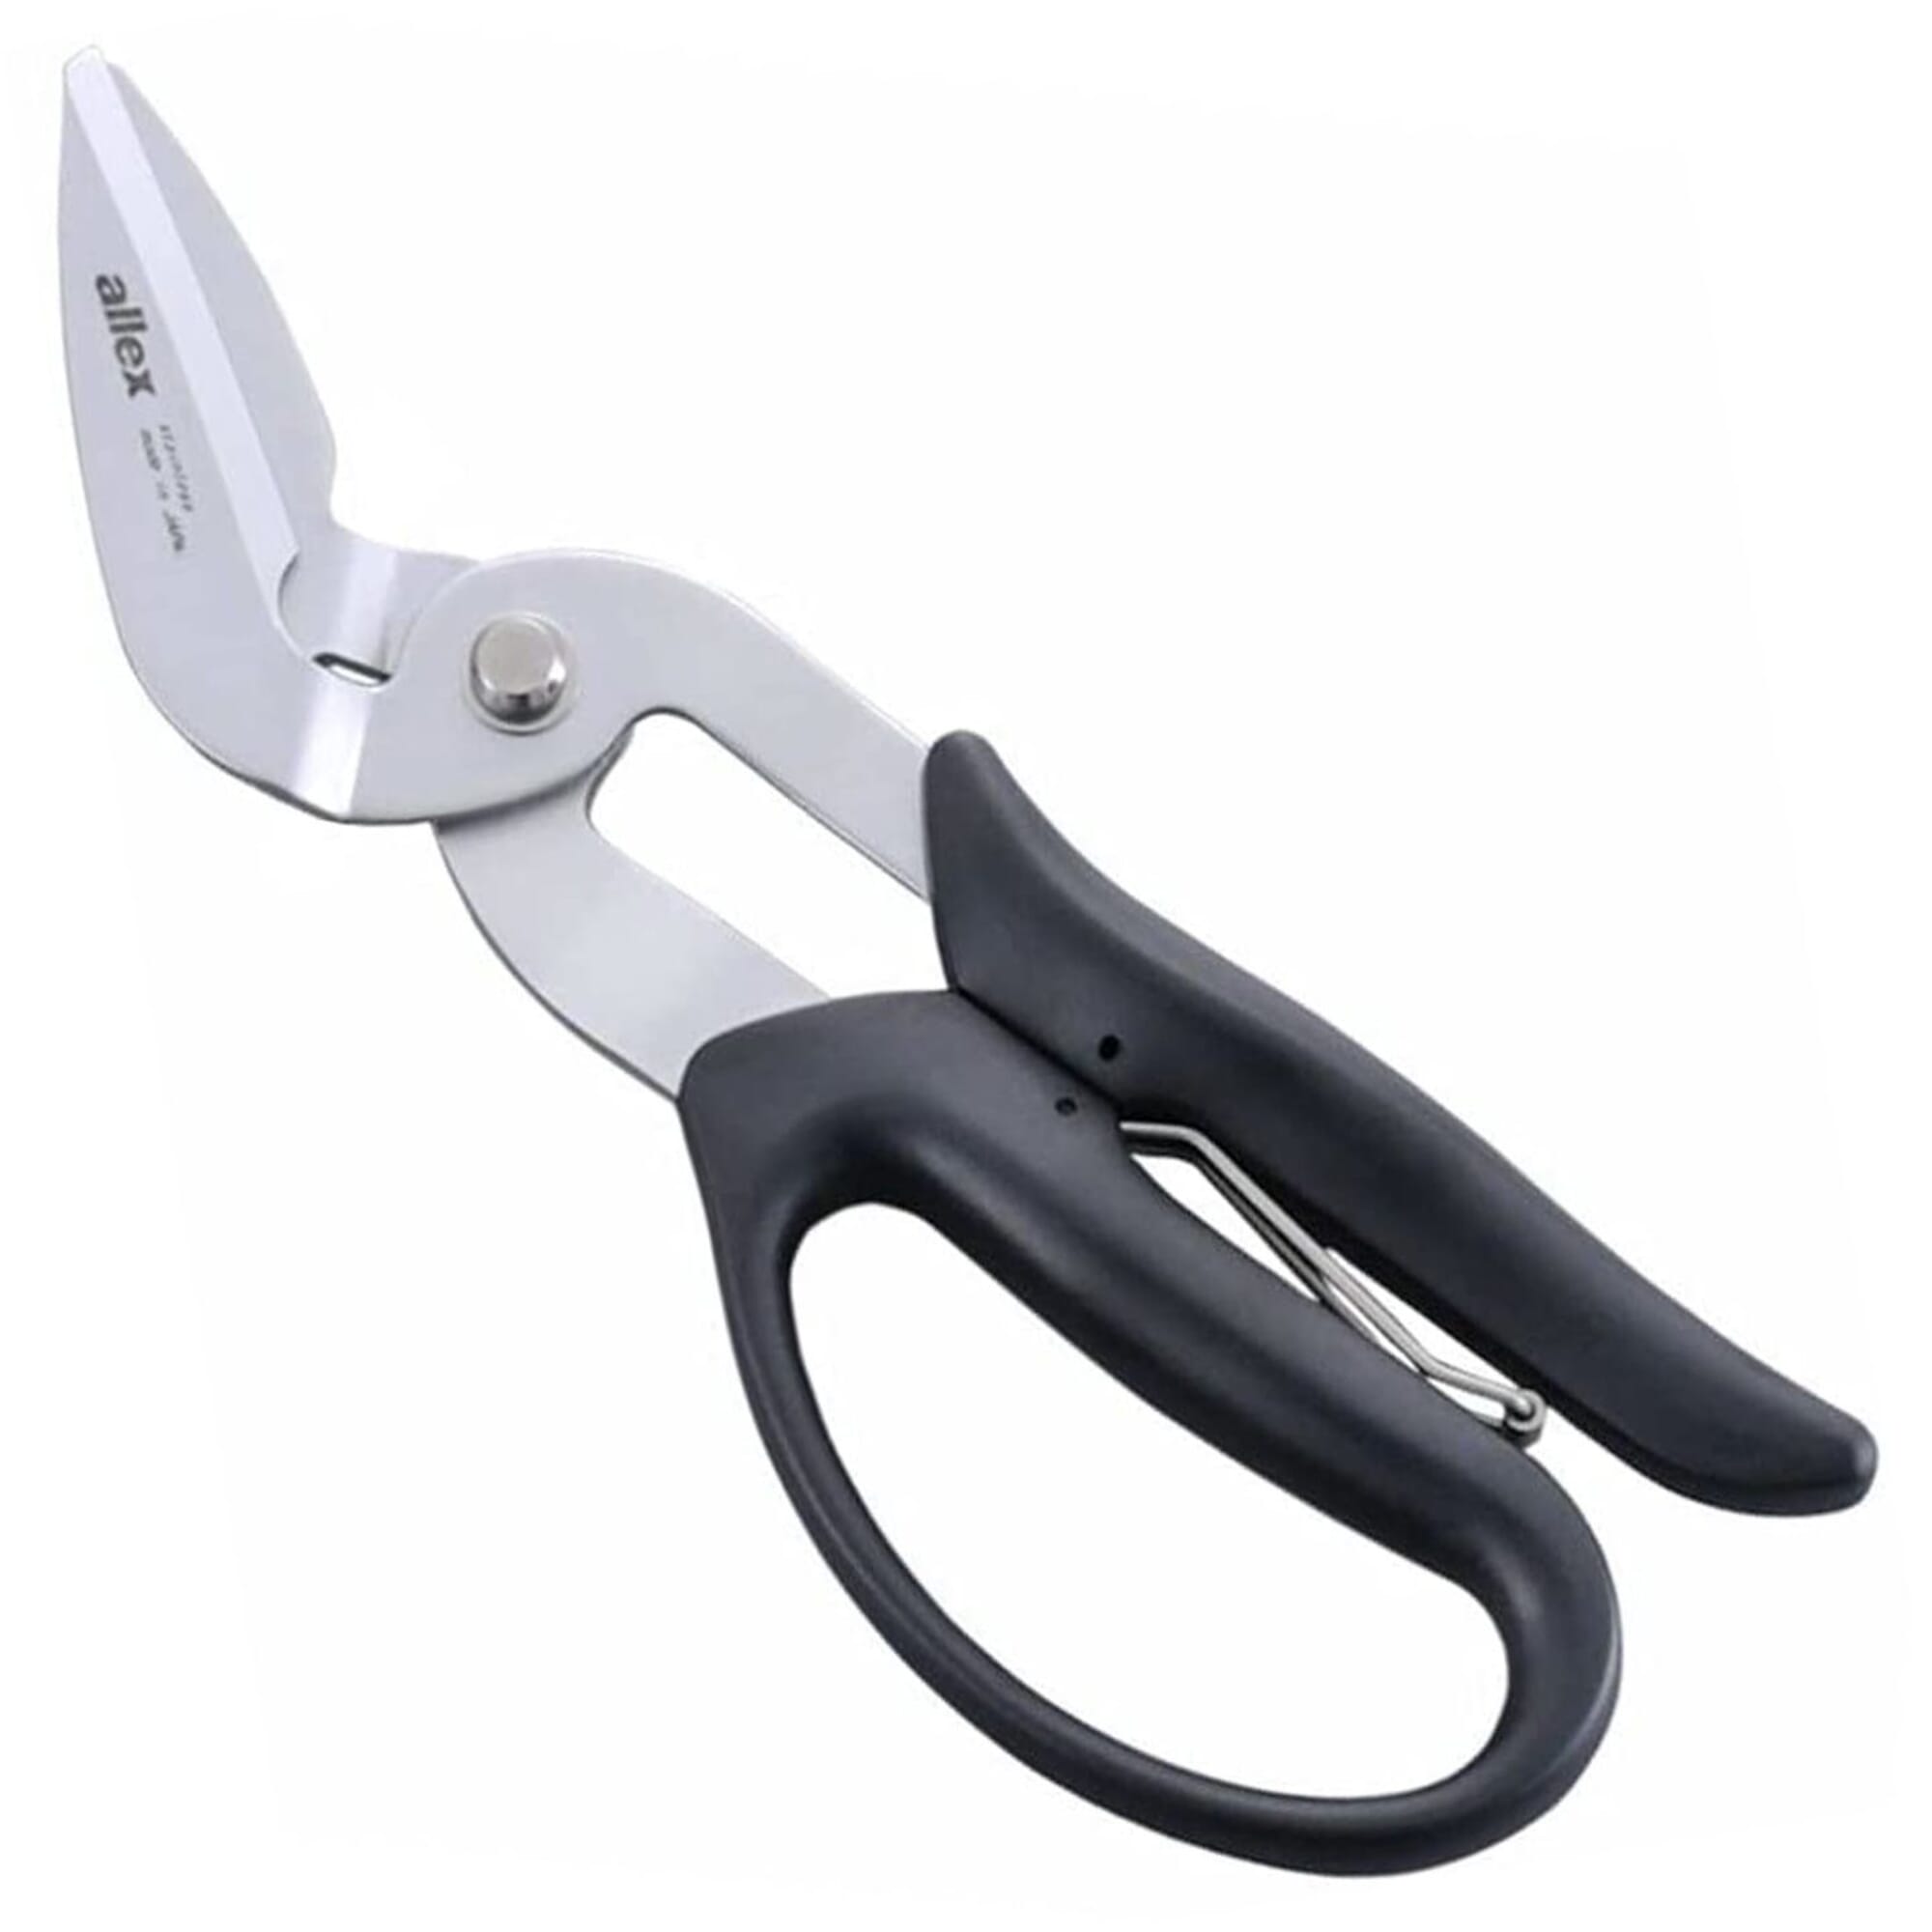 3 Pcs Leather Craft Hole Punch, White Steel Sewing Scissors Set